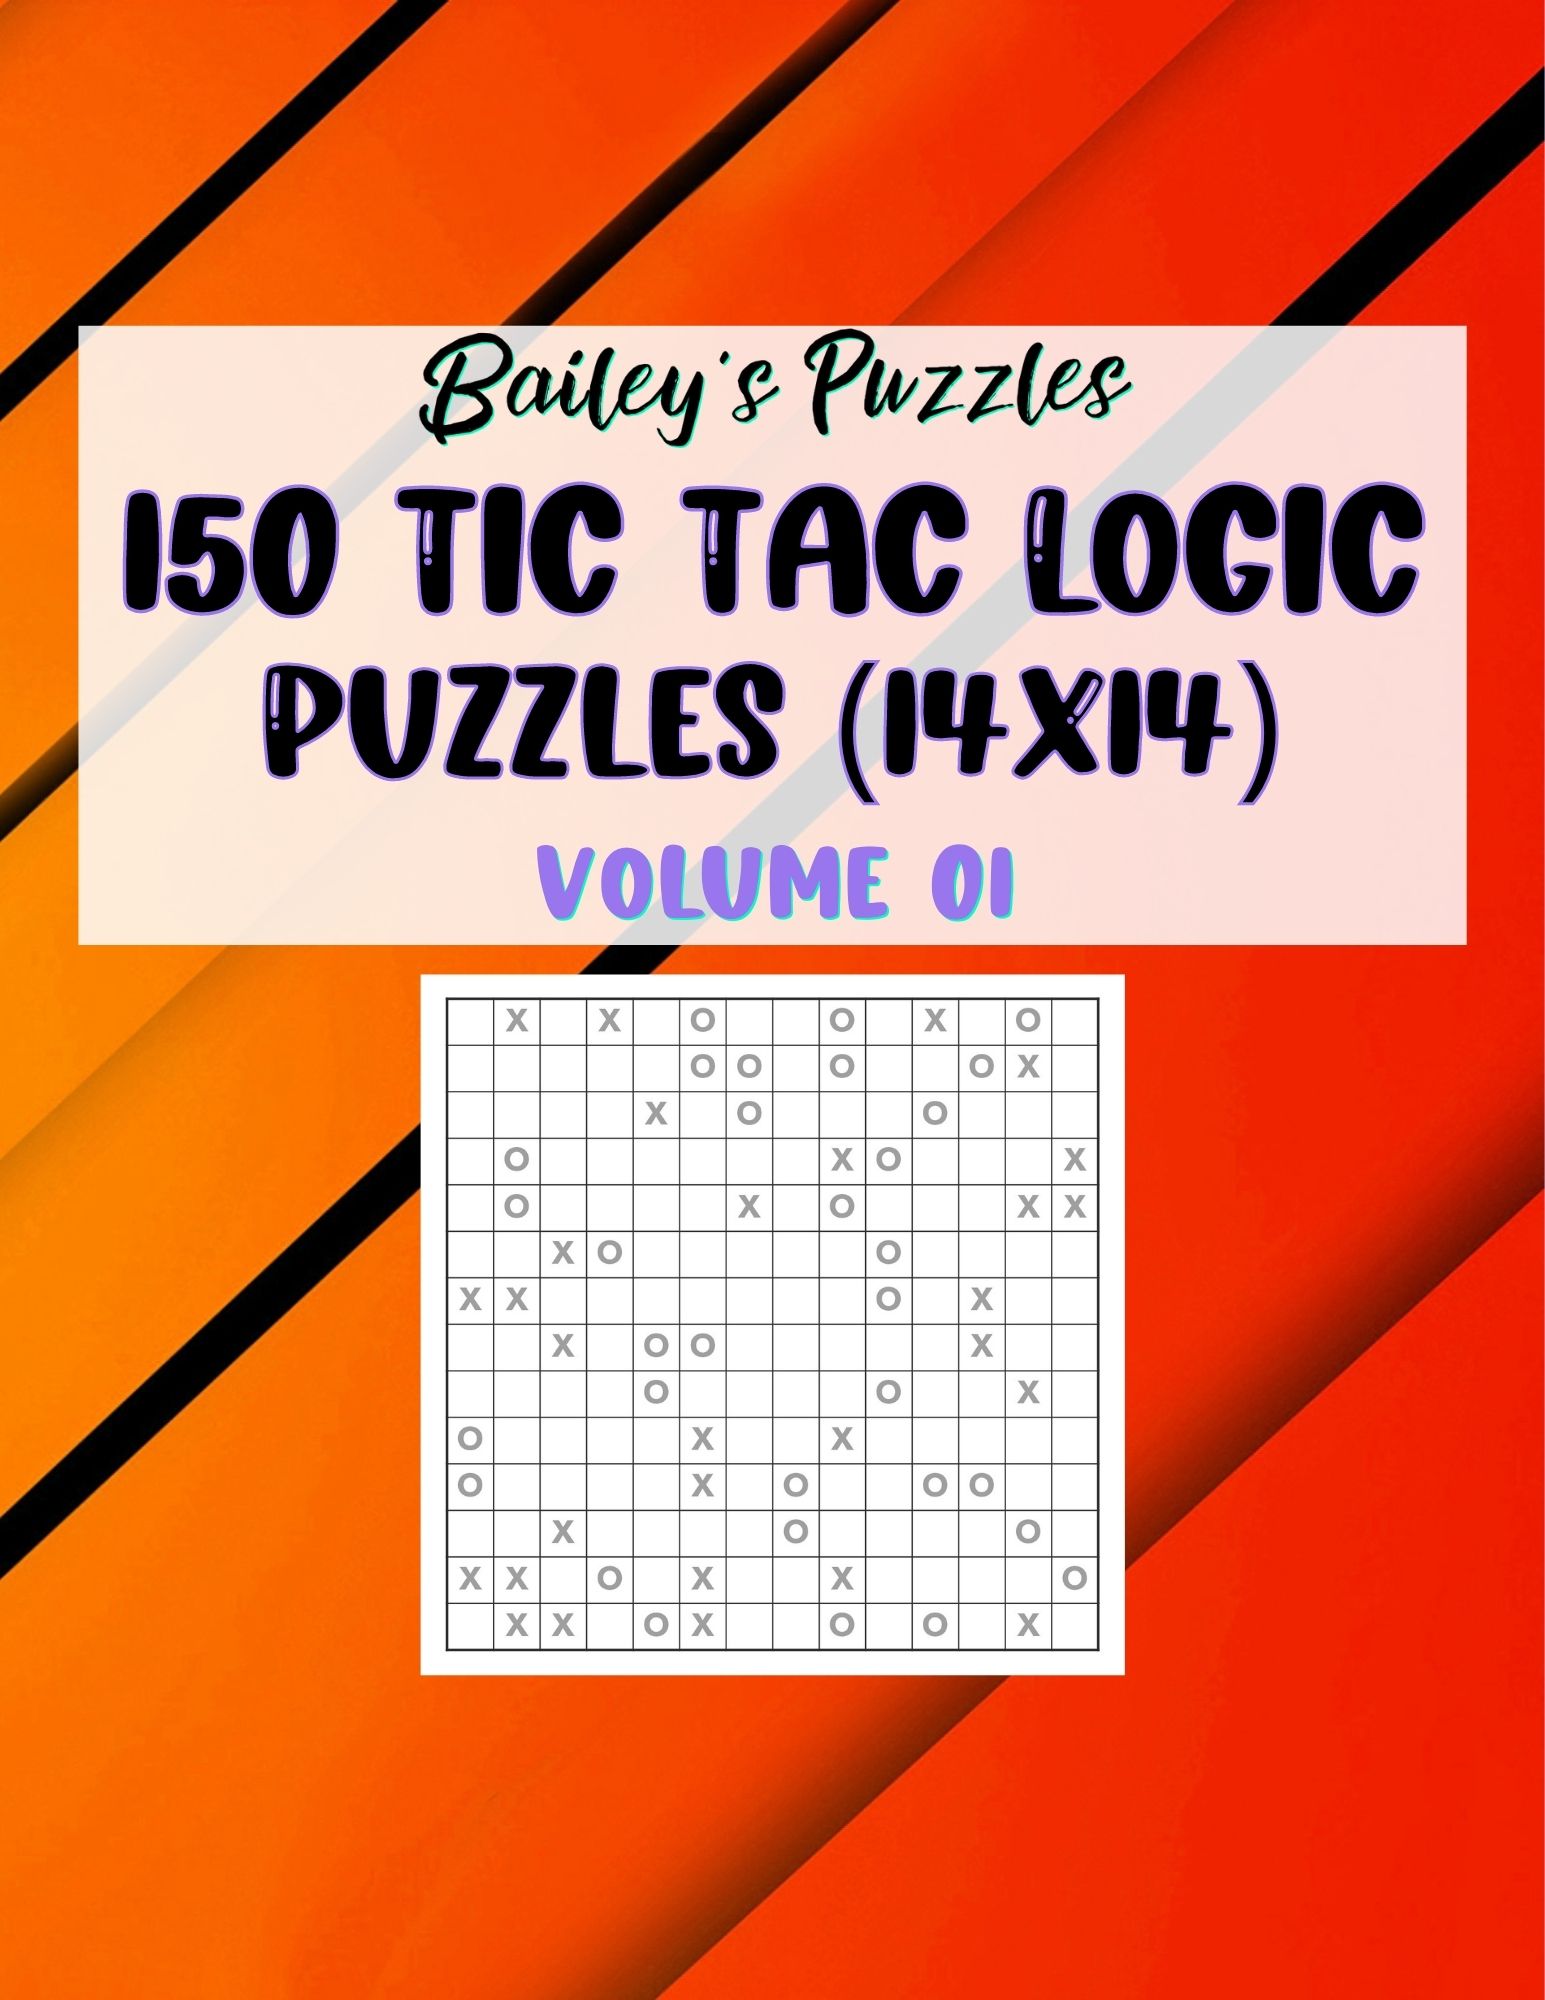 Front Cover - 150 Tic Tac Logic Puzzles (14x14)